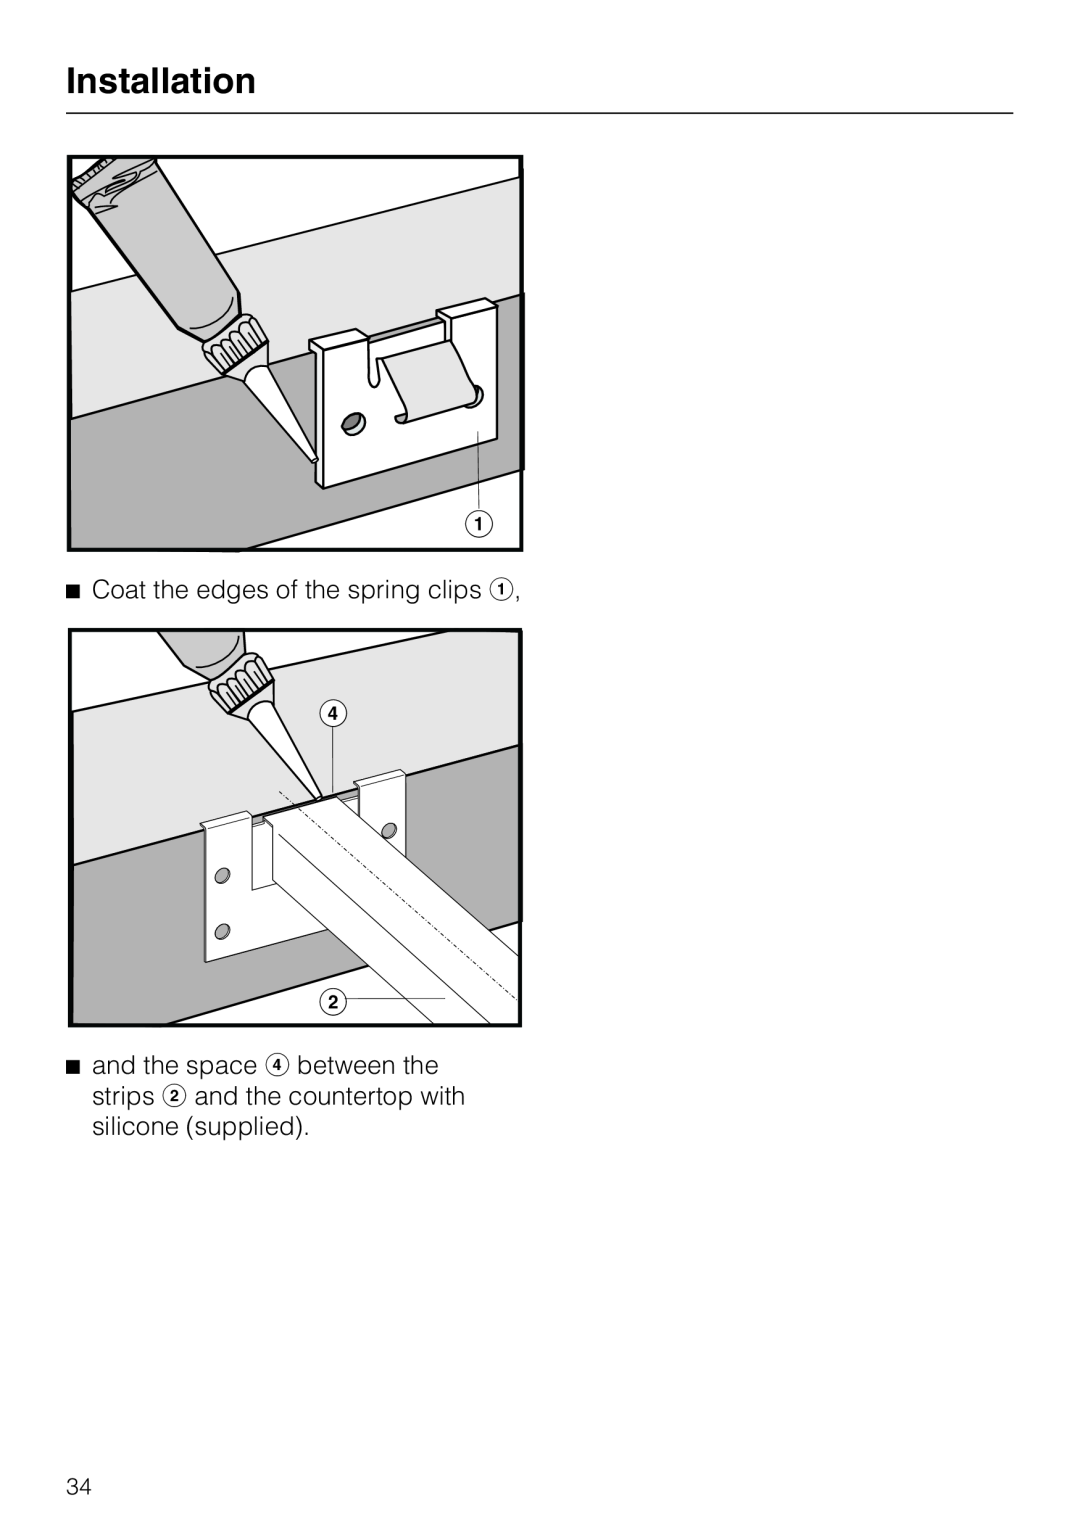 Miele CS 1223 installation instructions Installation, Coat the edges of the spring clips a 